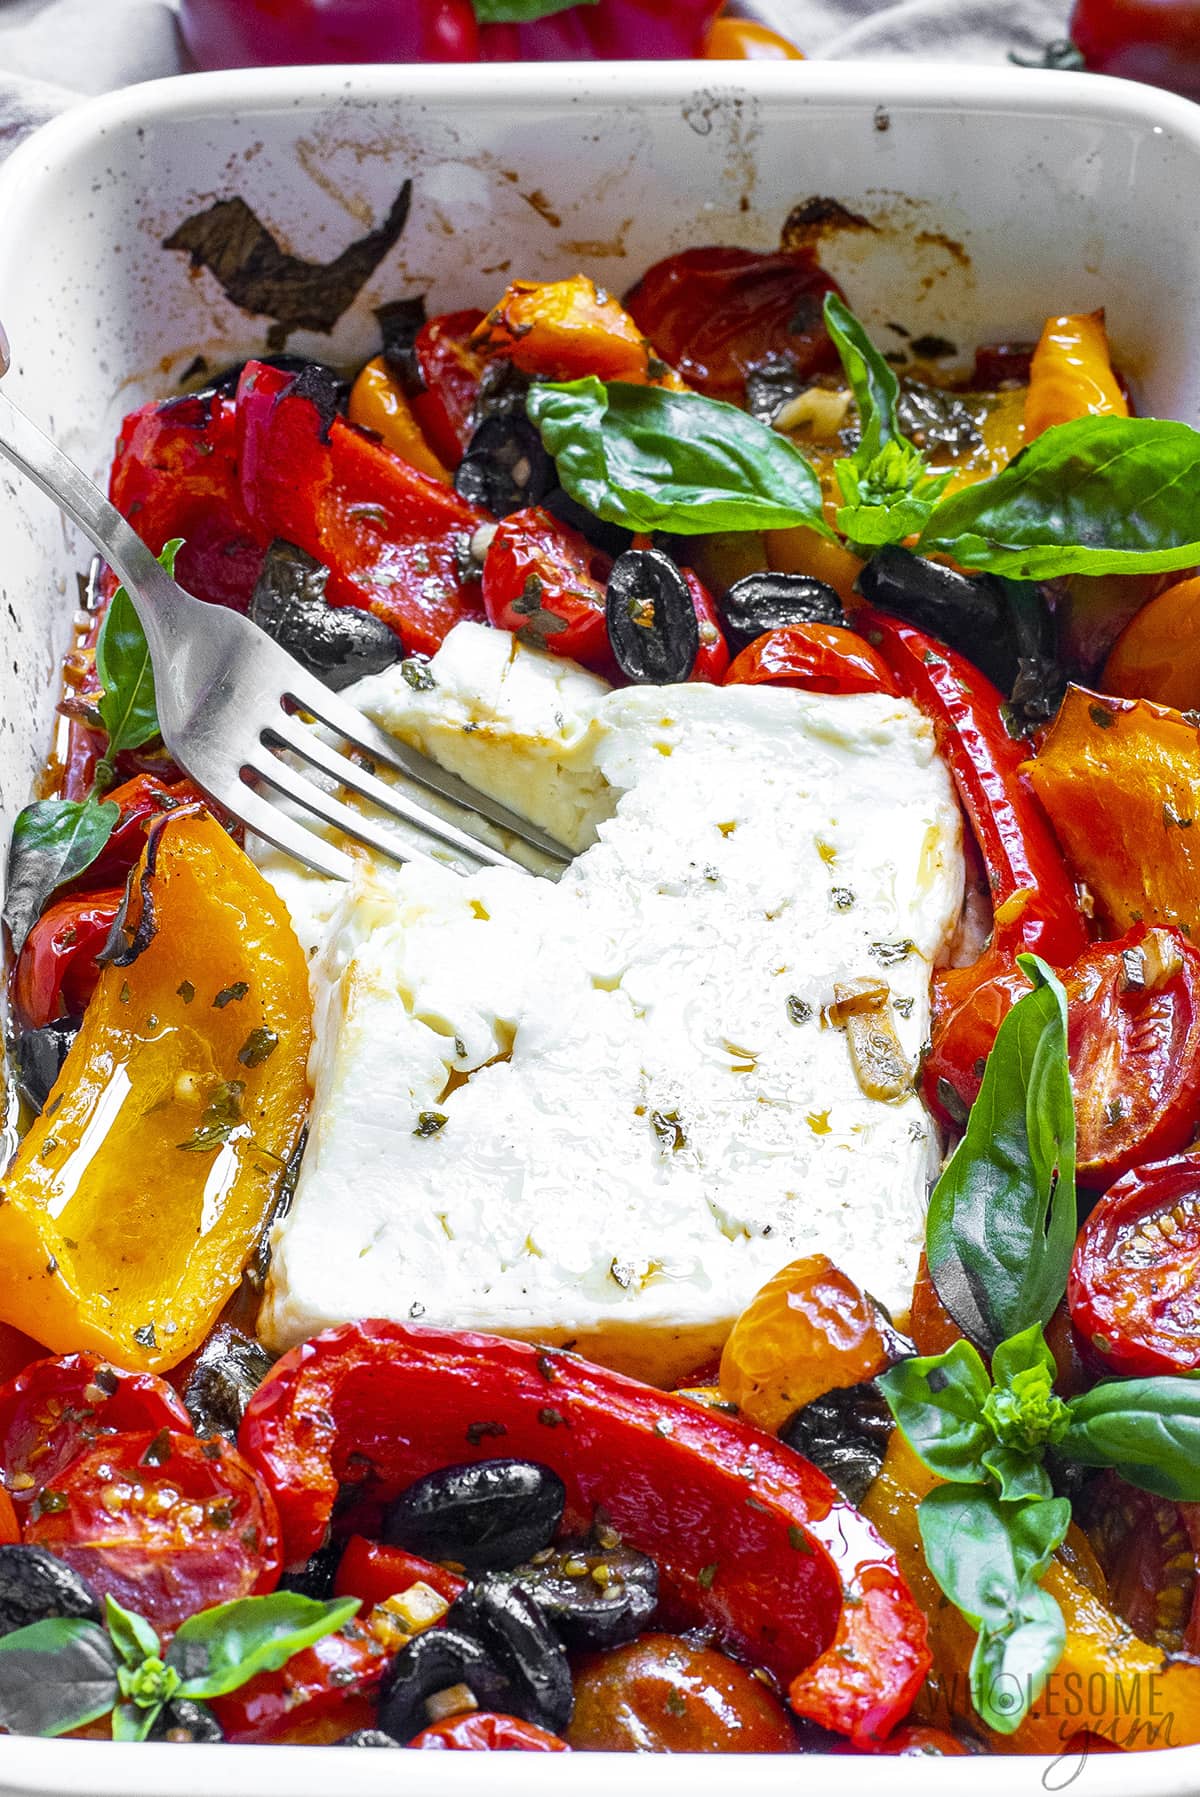 Baked feta is softened and pierced with a fork.